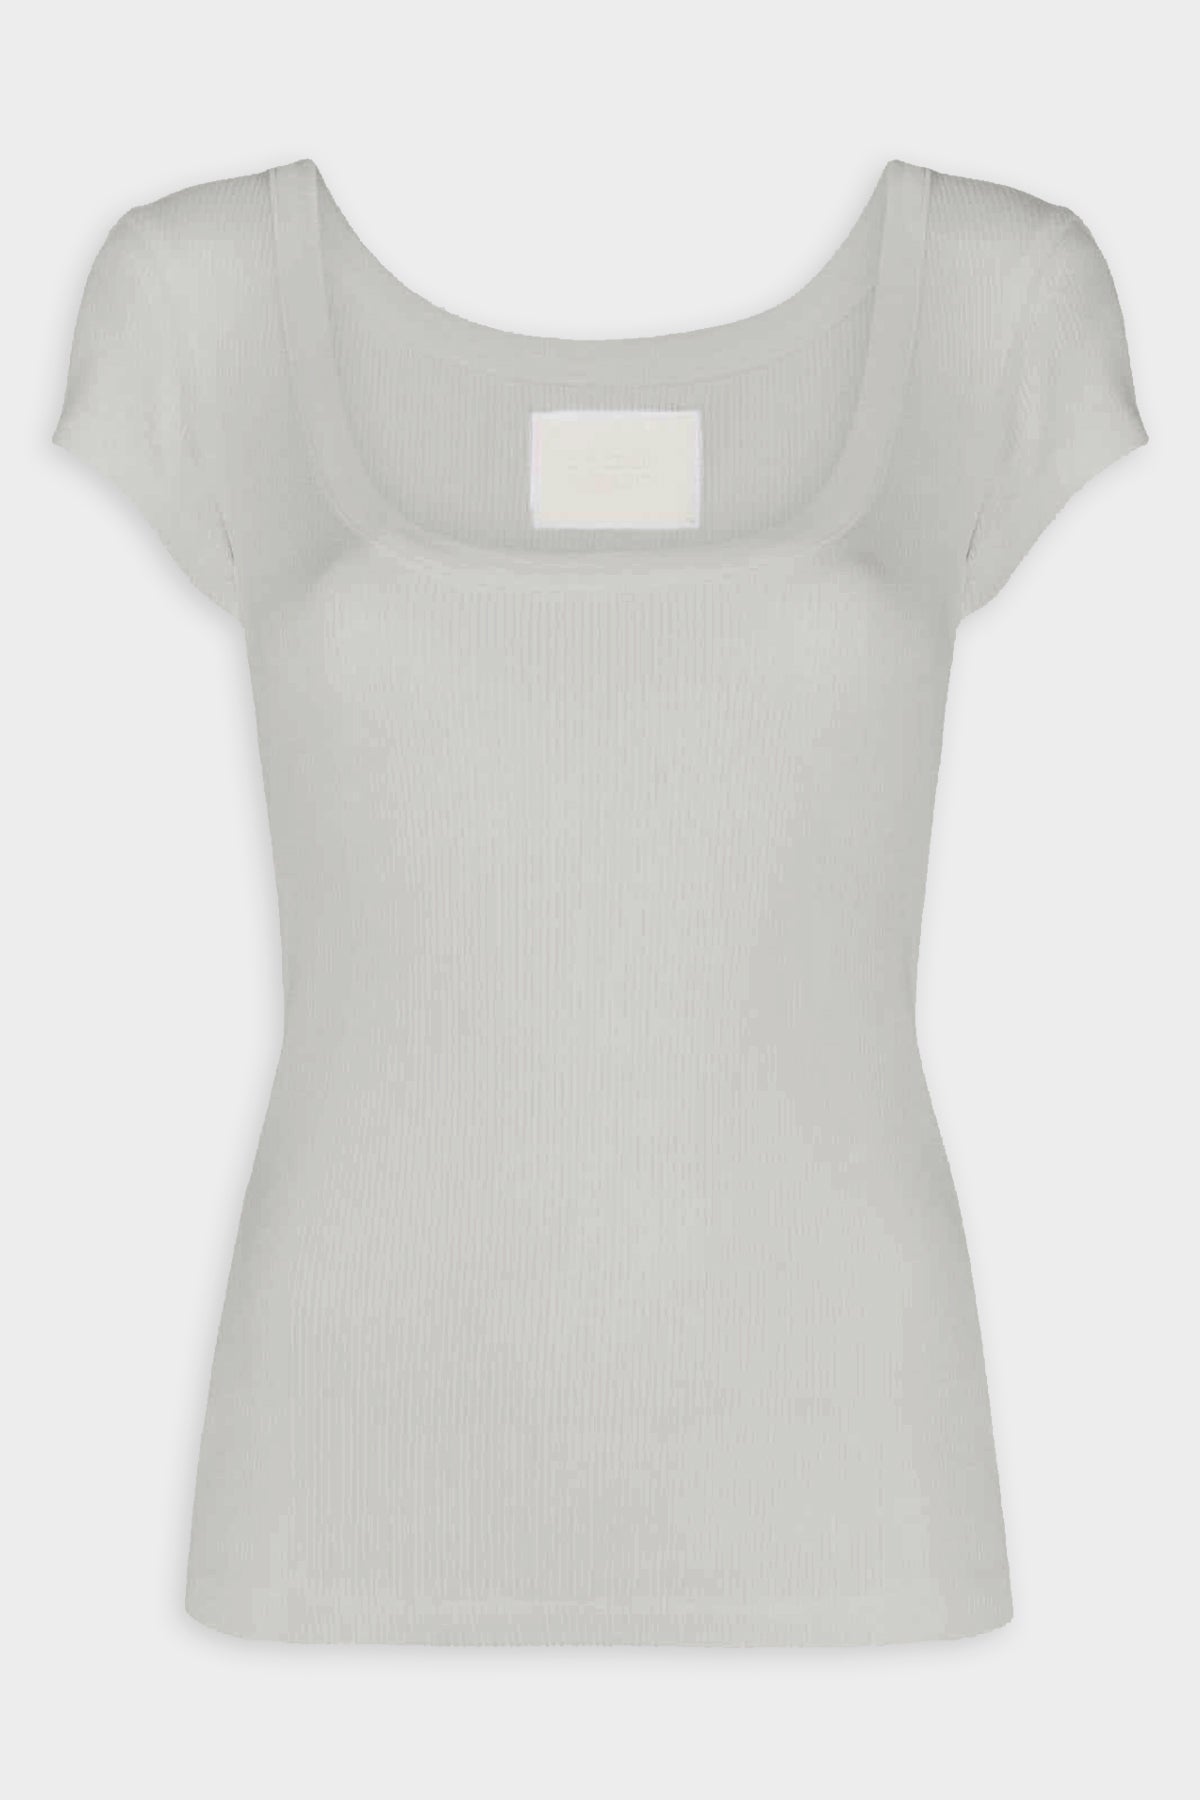 Lima Scoop Neck Tee in Andes - shop-olivia.com